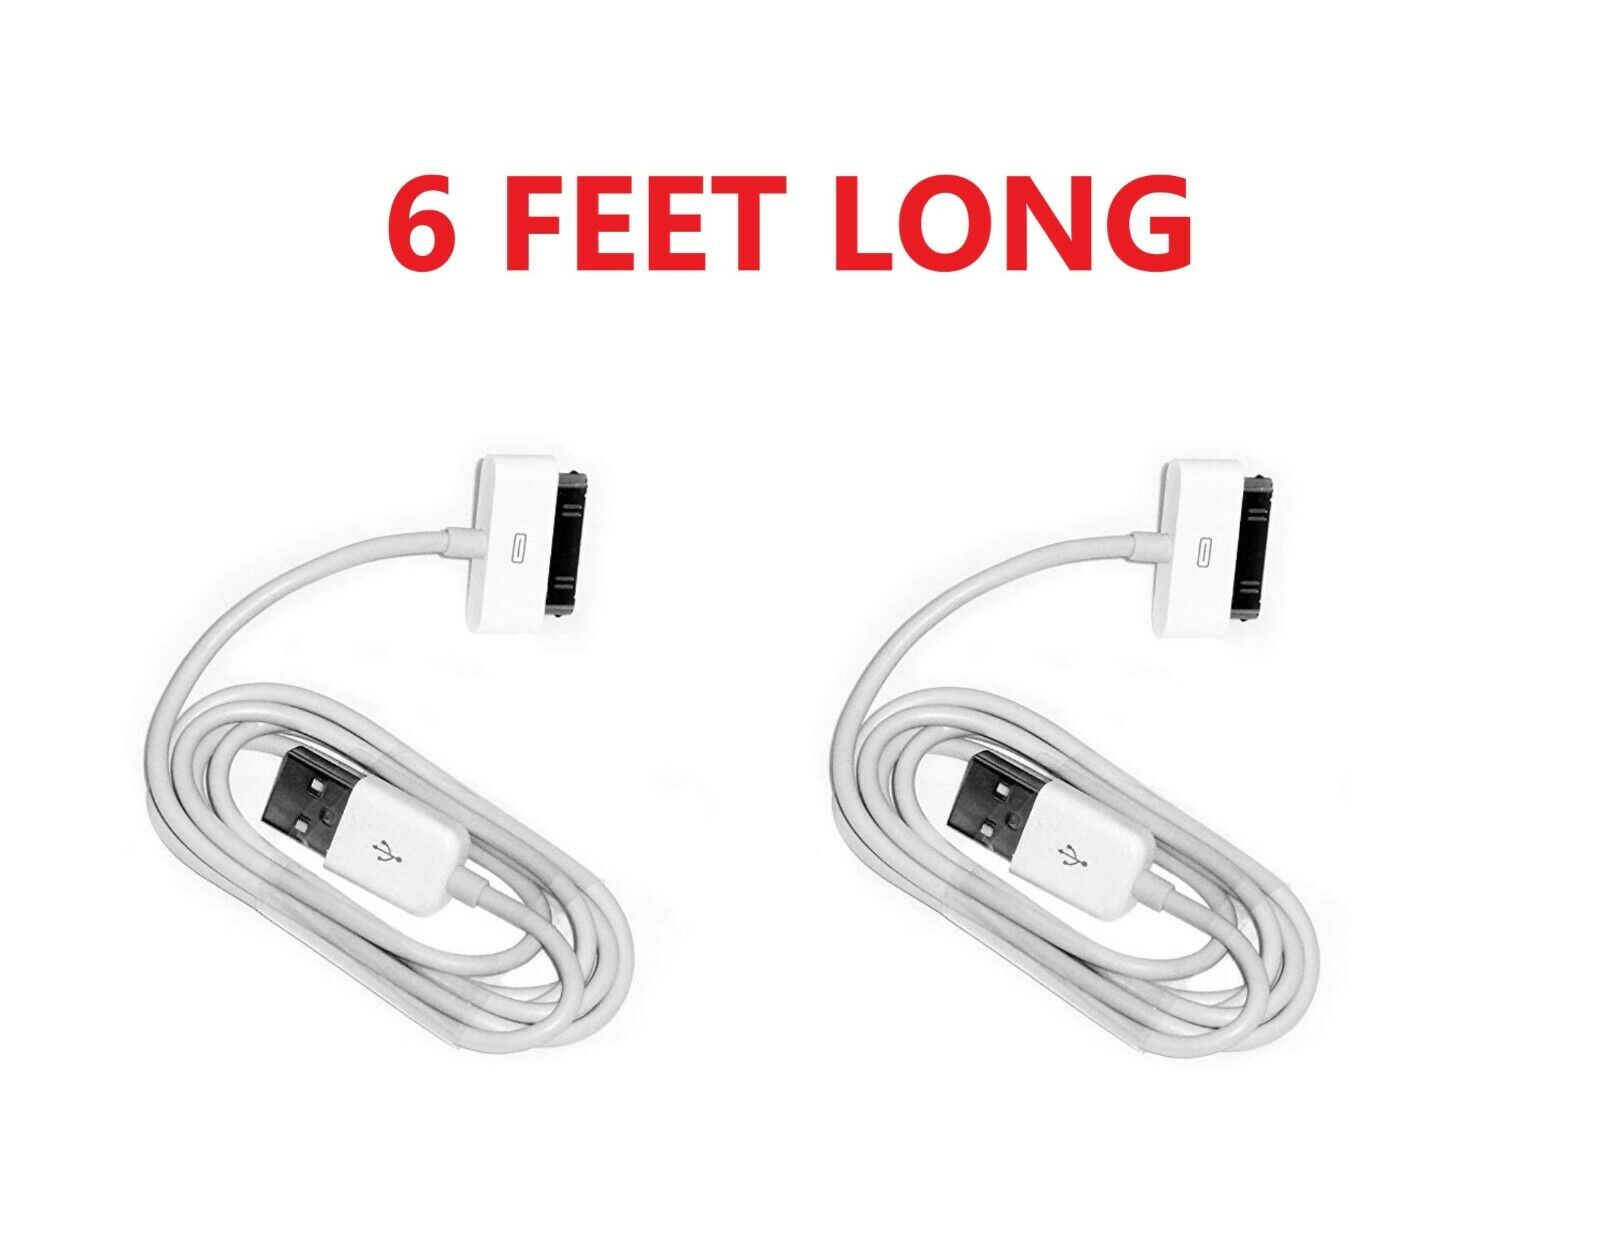 2Pack USB Charger Cable 6ft Sync Data Charging Cord Apple iPhone 4/4S/iPad/iPod EZT Does Not Apply